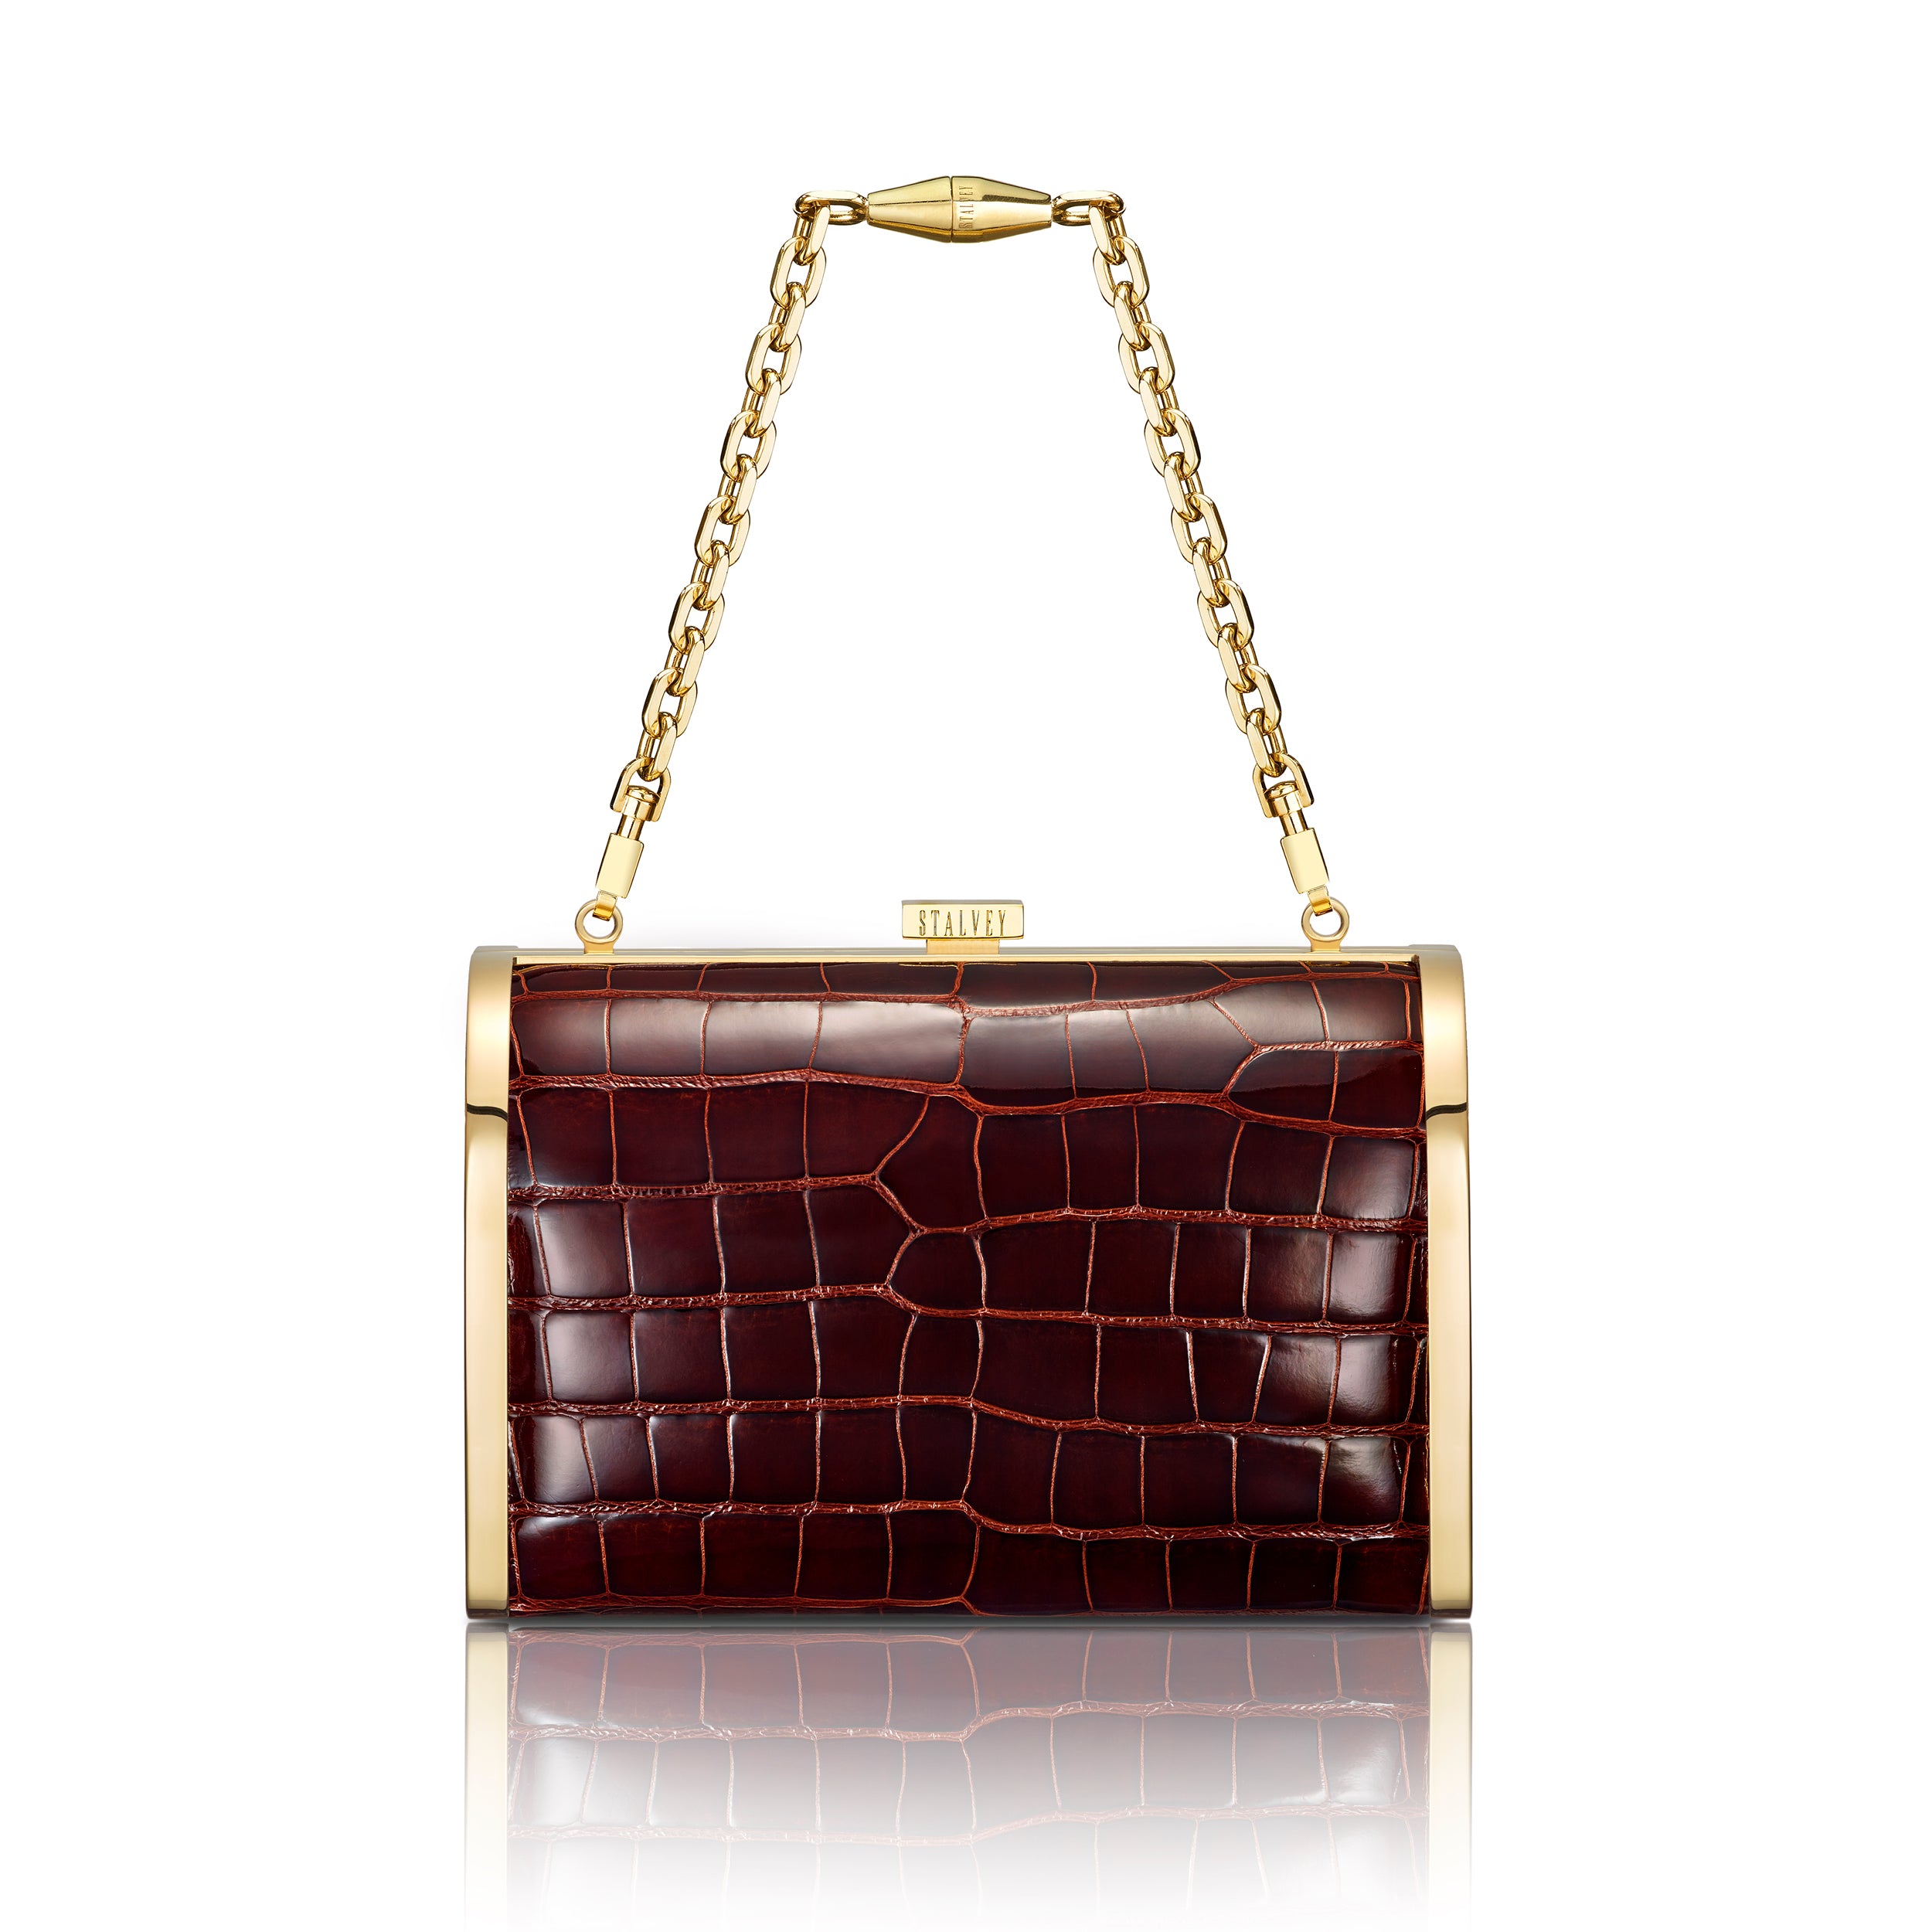 STALVEY Rounded Clutch in Burgundy Alligator with 24kt Gold Hardware Front View with Chain